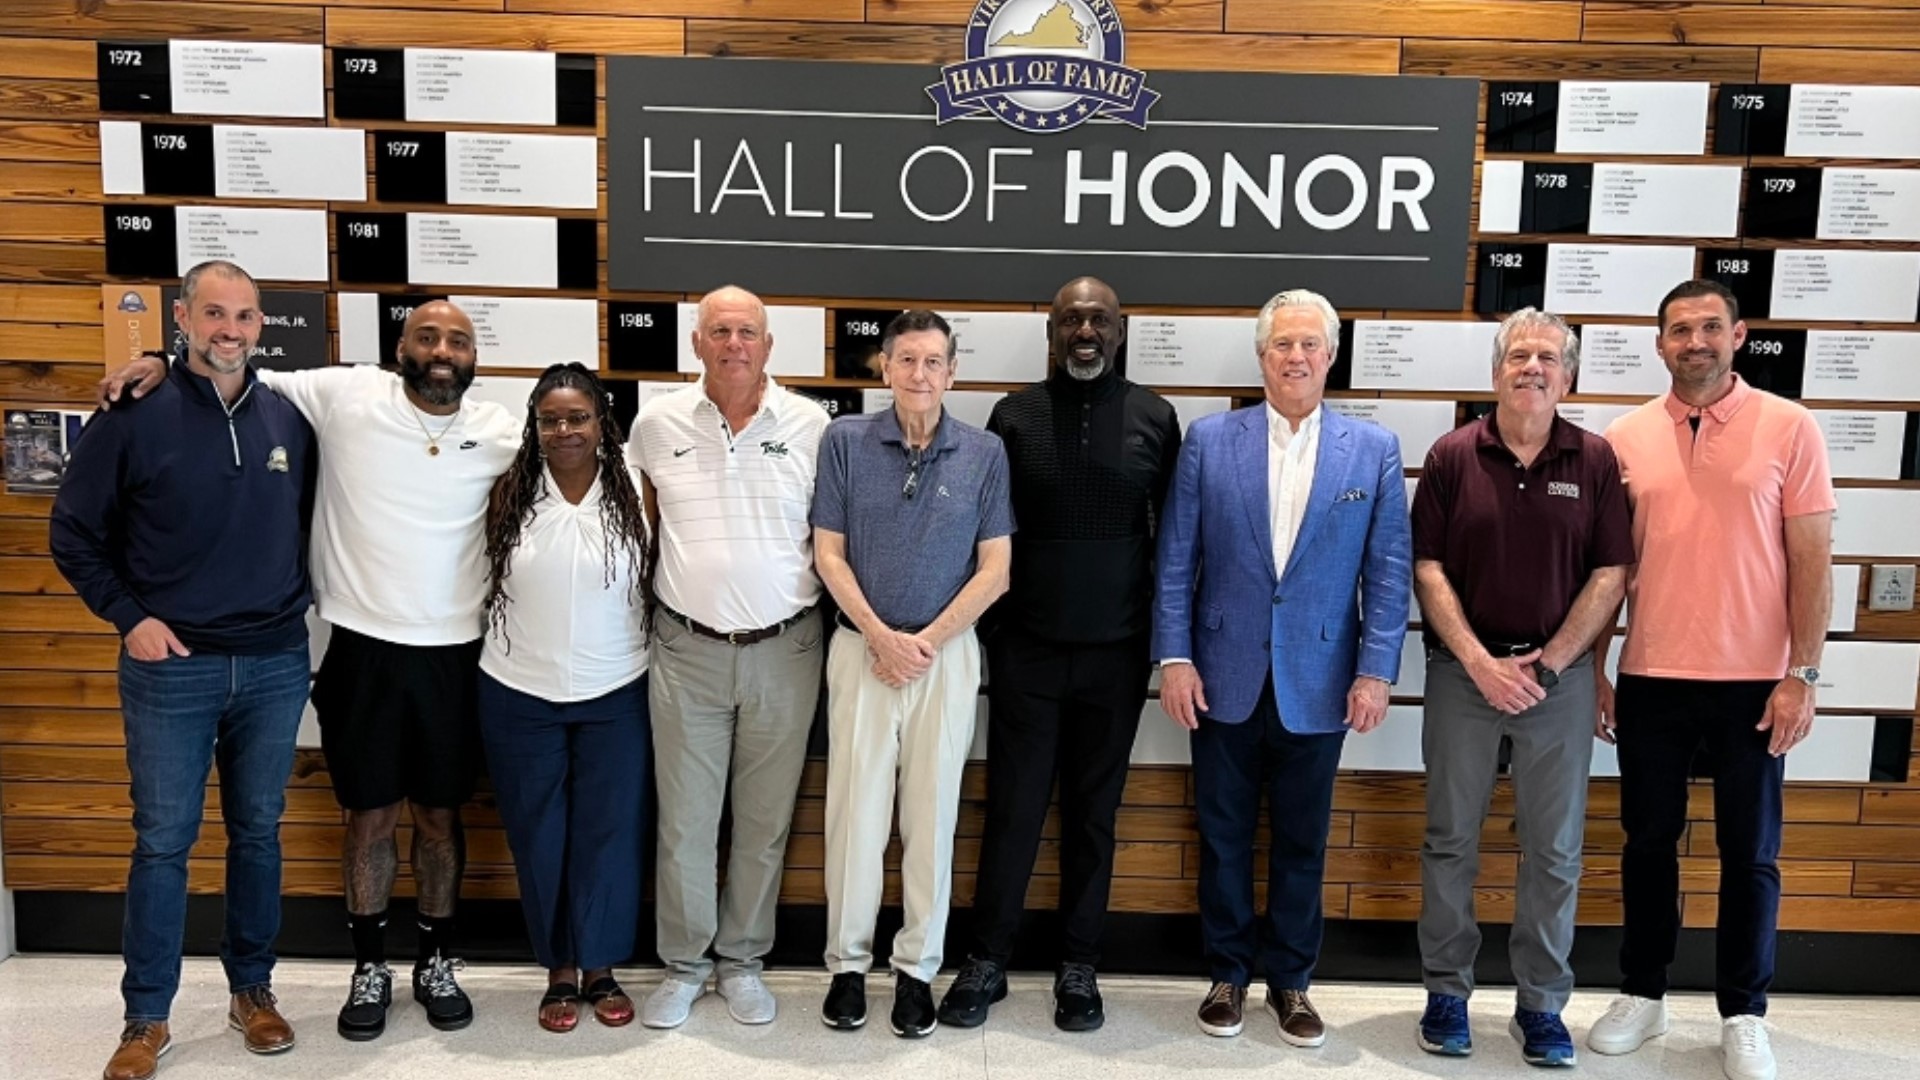 In its 50th year, 9 new inductees were welcomed into the prestigious Virginia Sports Hall of Fame with many hailing from the 757.